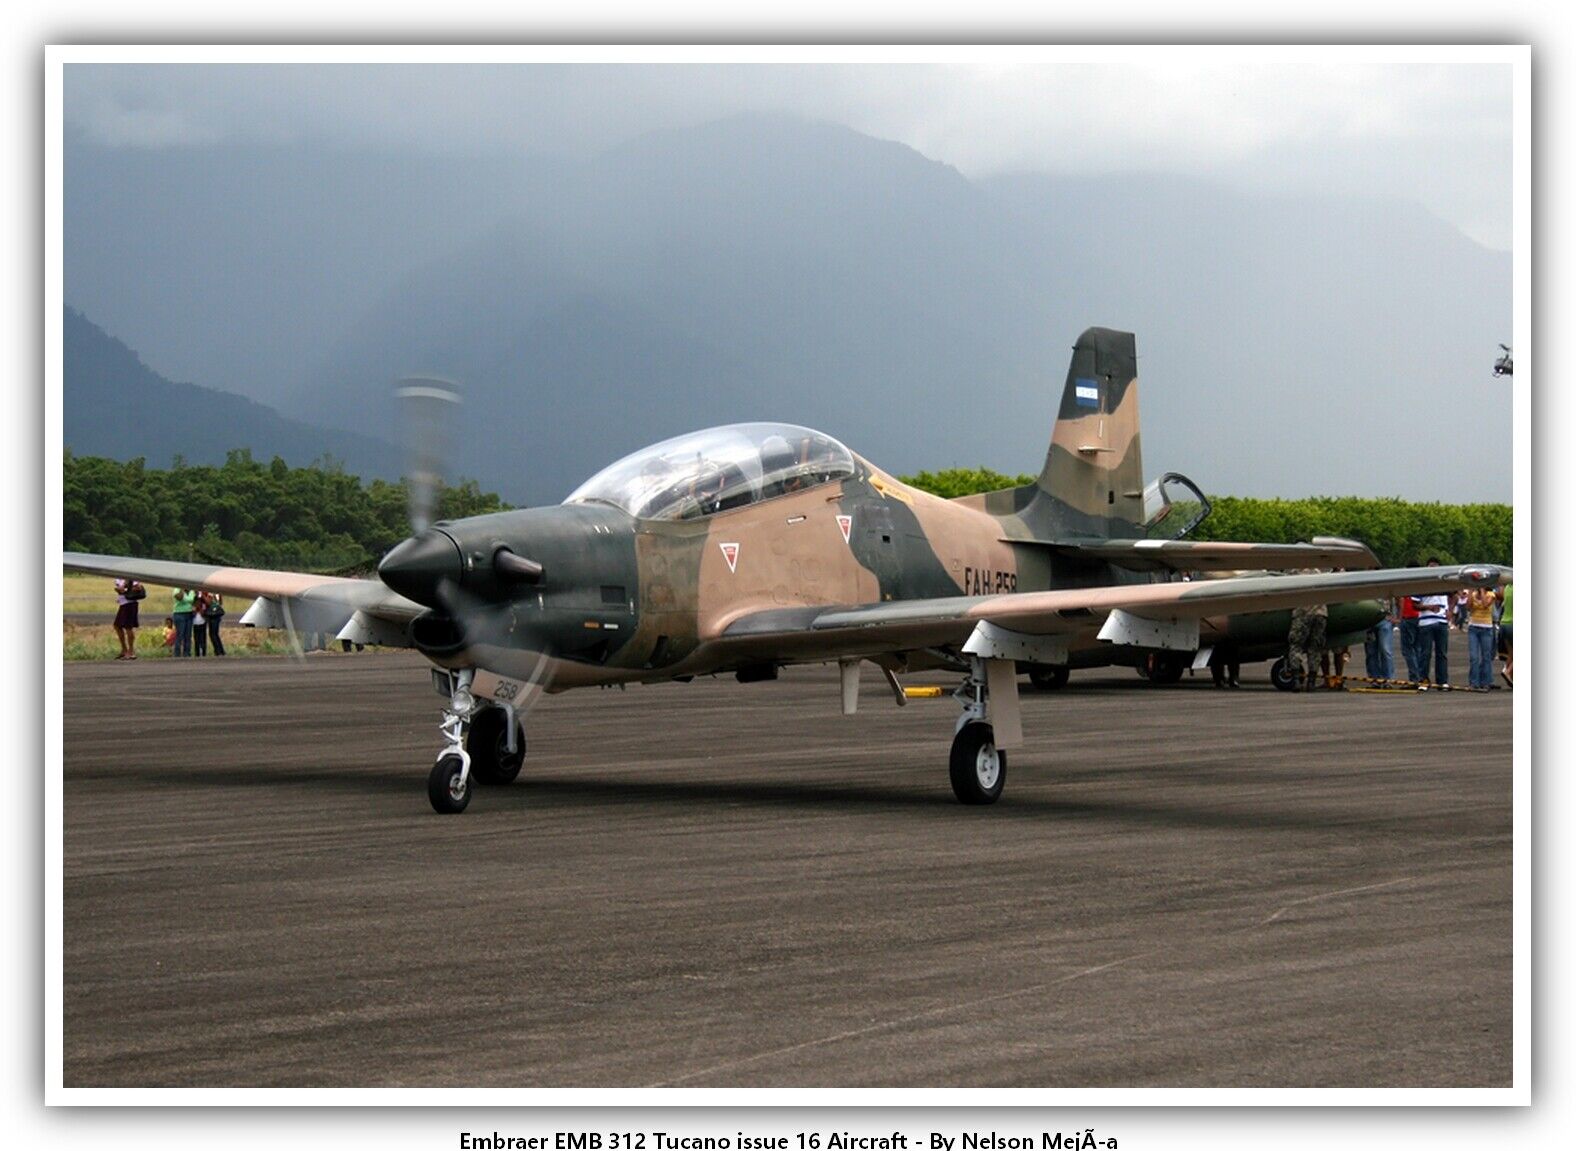 Embraer EMB 312 Tucano issue 16 Aircraft